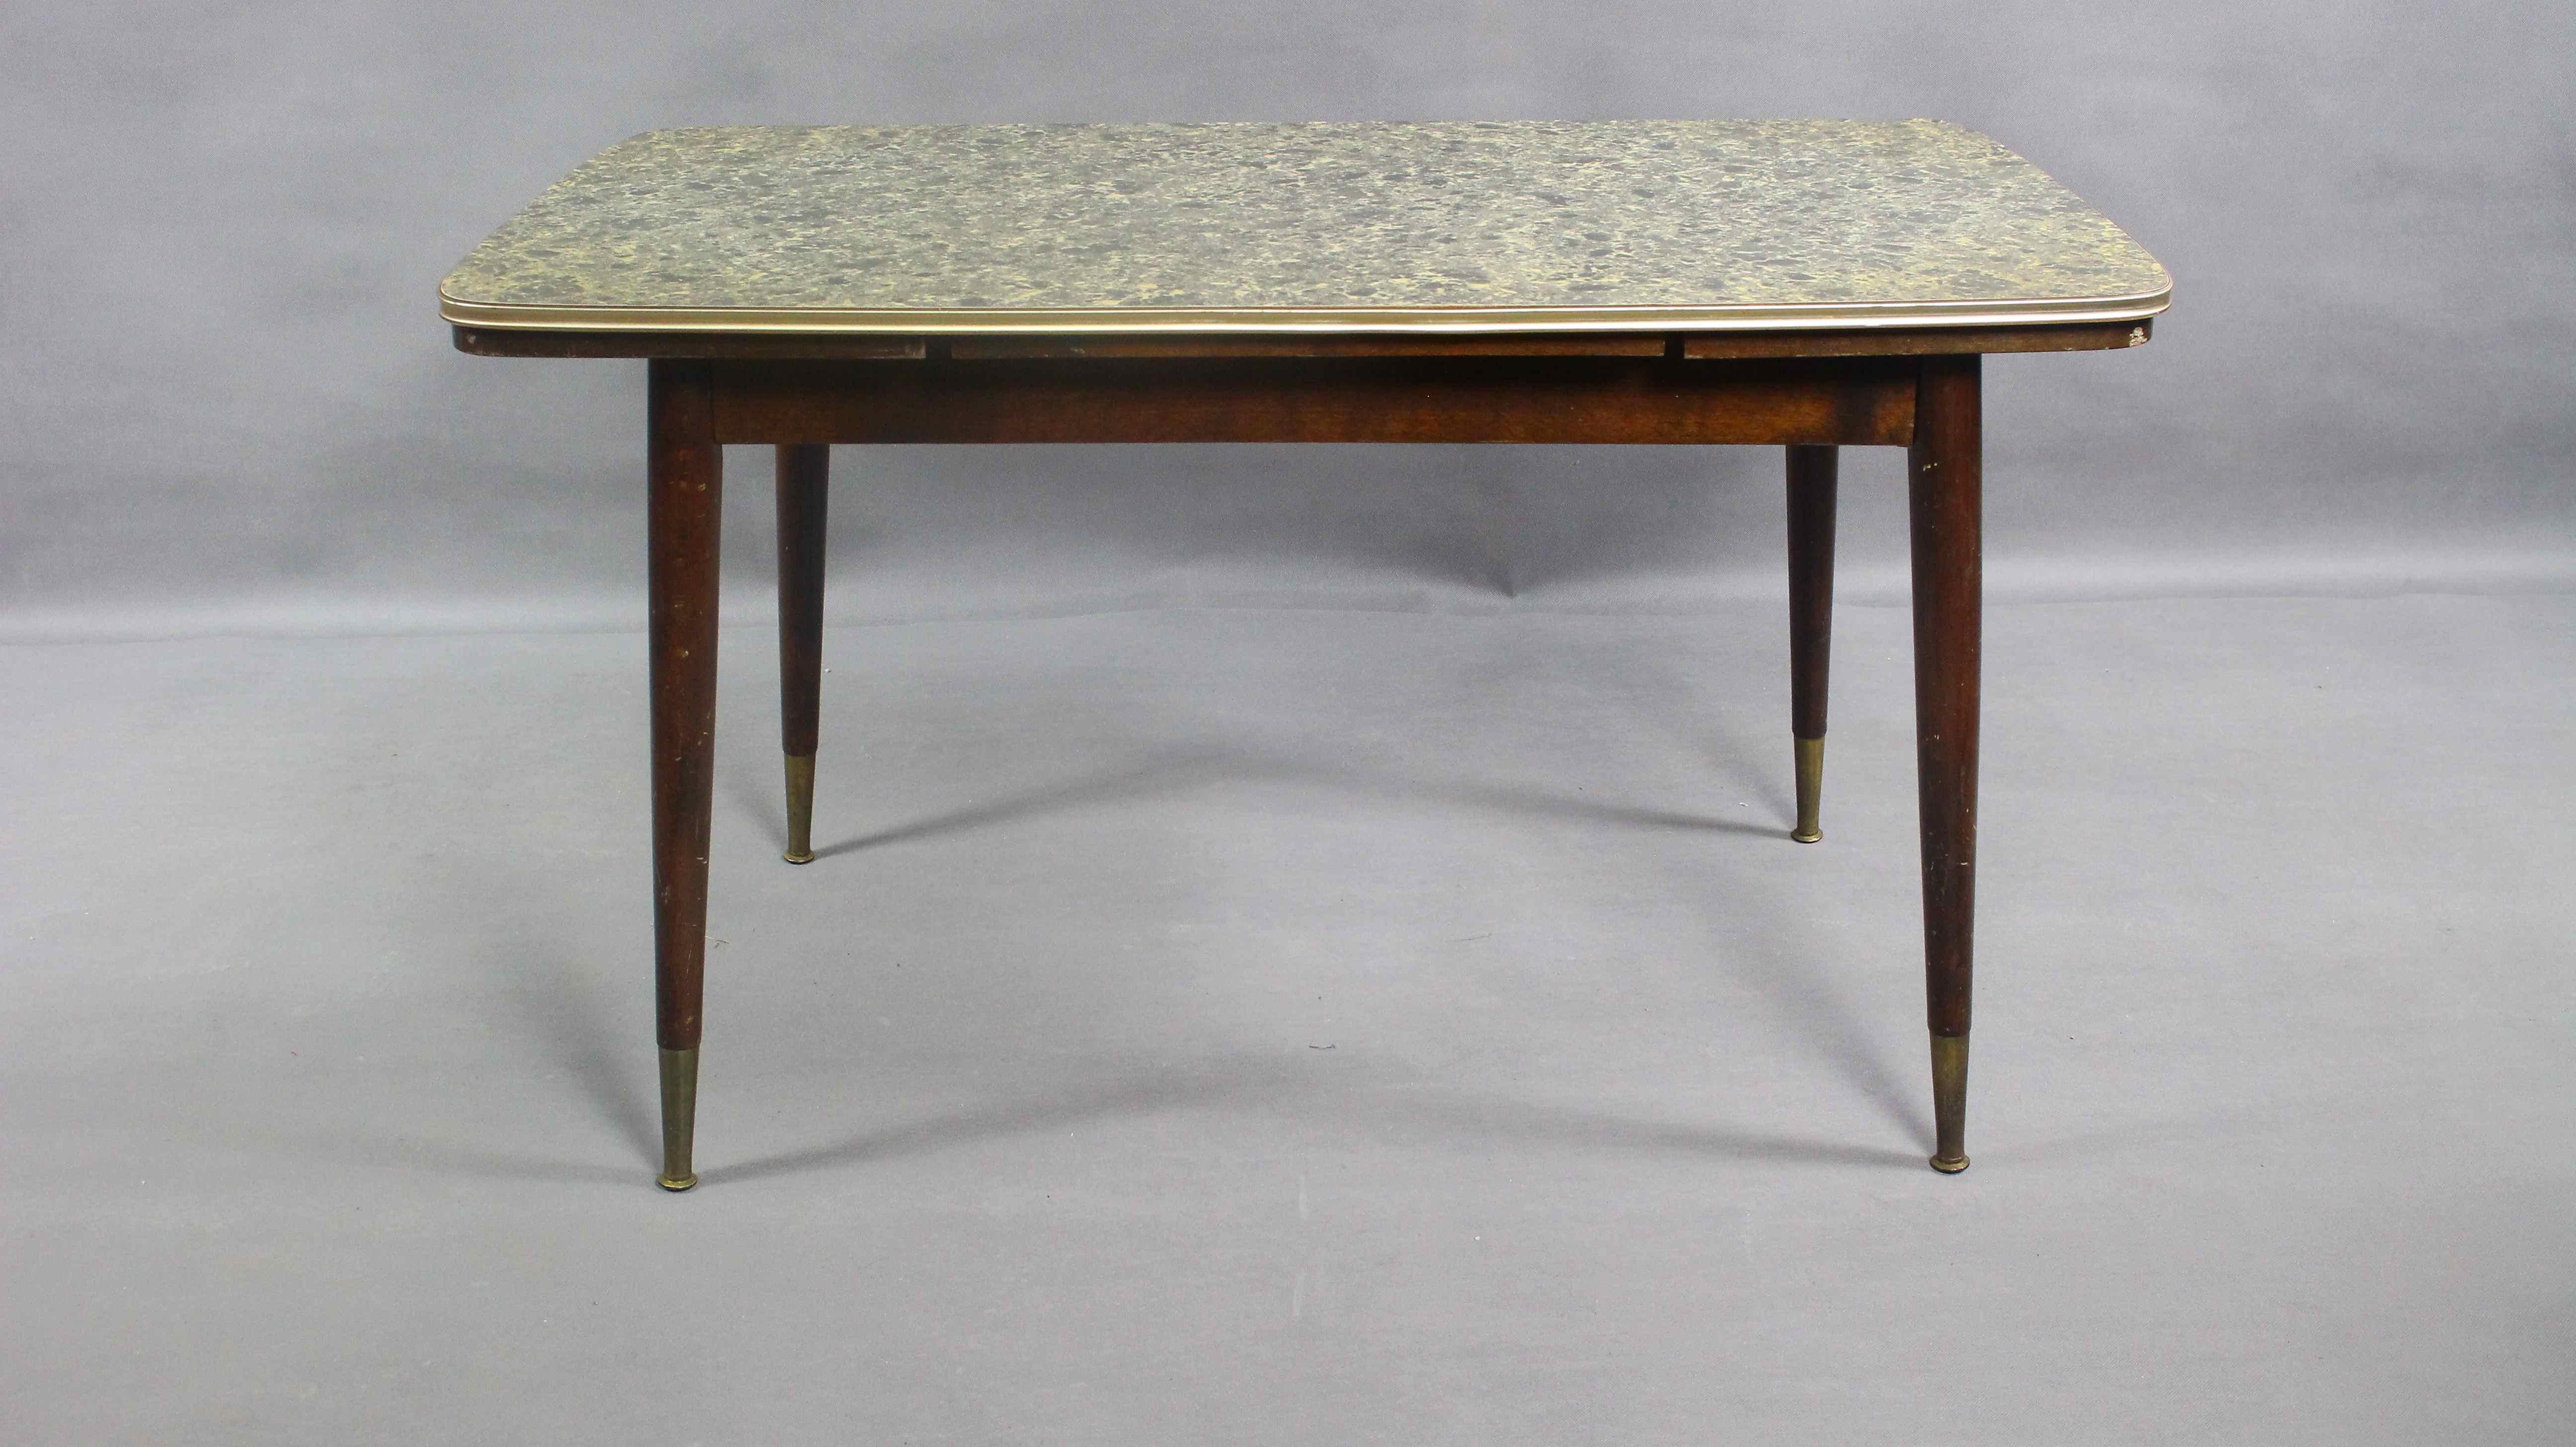 Rockabilly adjusted table from the 1560s.
In original and good condition.
Traces of use, minor damage to the veneer.
Table dimensions after unfolding and raising: Width 180 cm  Height 75 cm.
Table will be unfolded for the shipping.